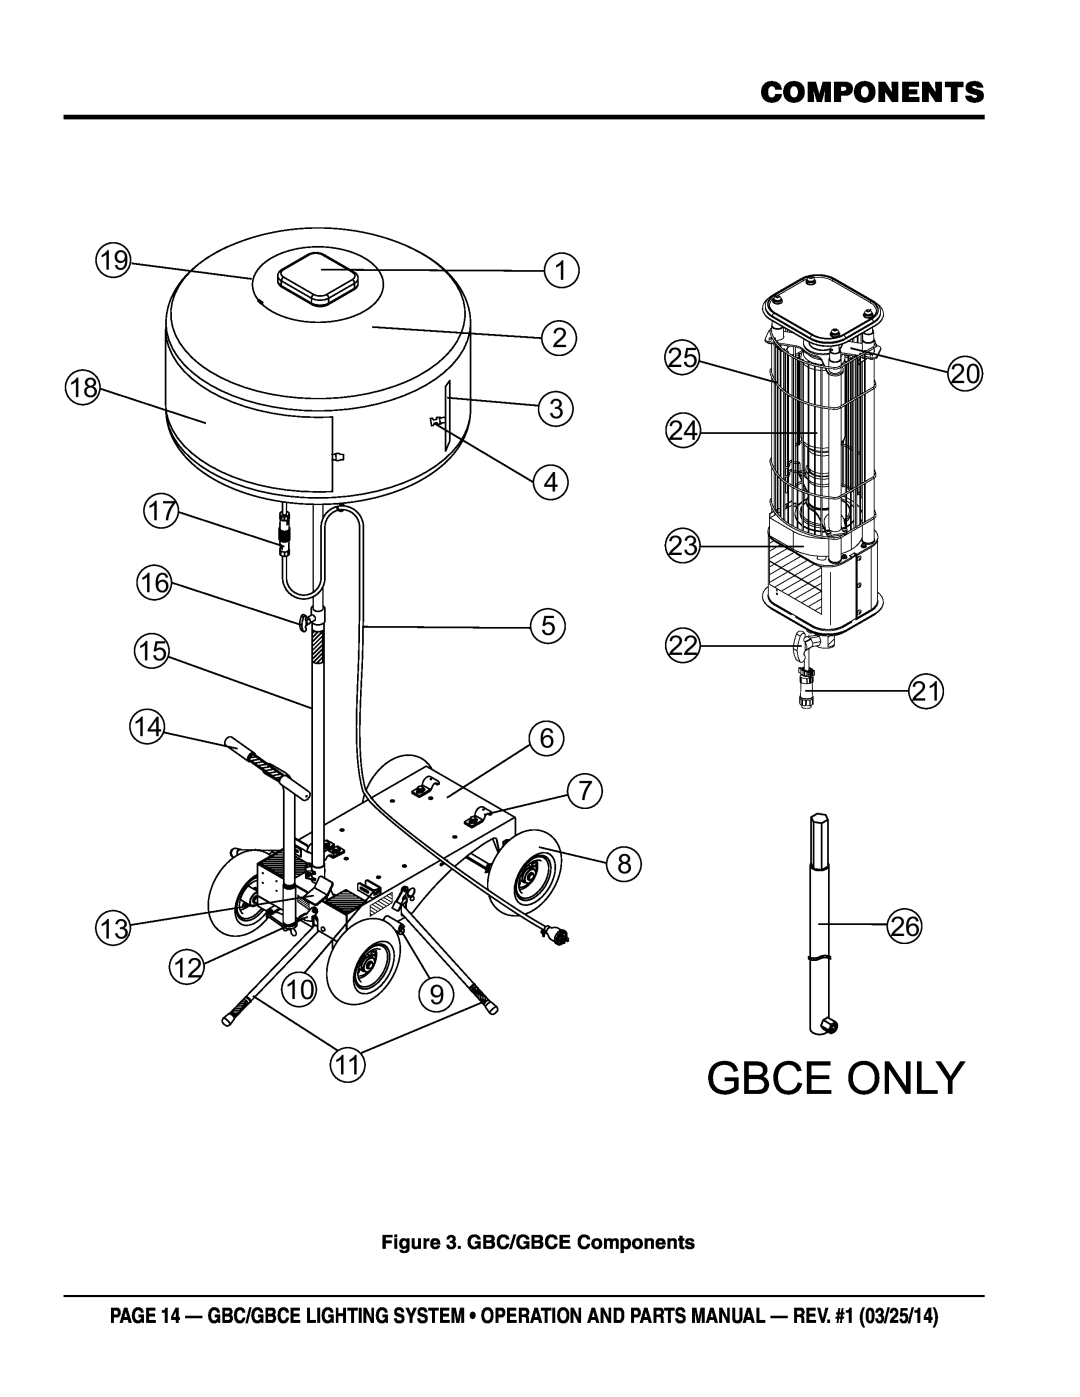 Multiquip gbe/gbce manual components, Gbce Only, GBC/GBCE Components 